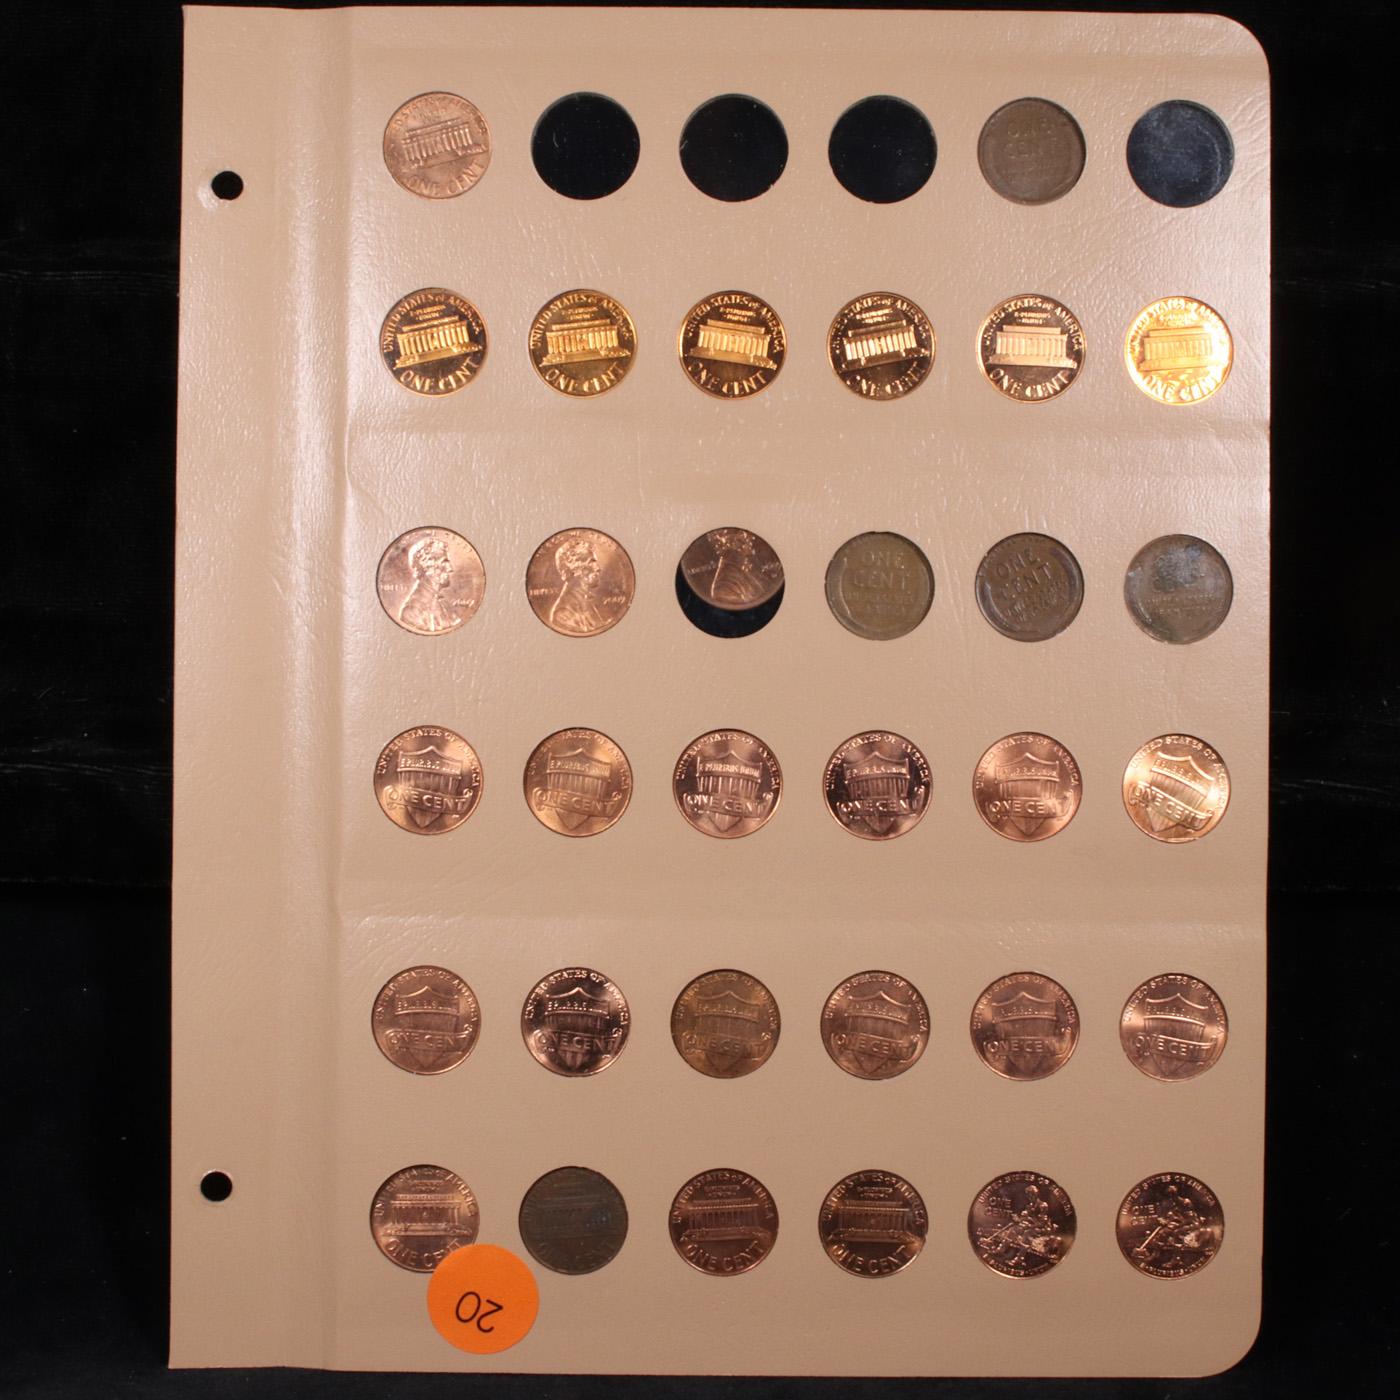 Near Complete Lincoln cent page 1933-2015 31 coins